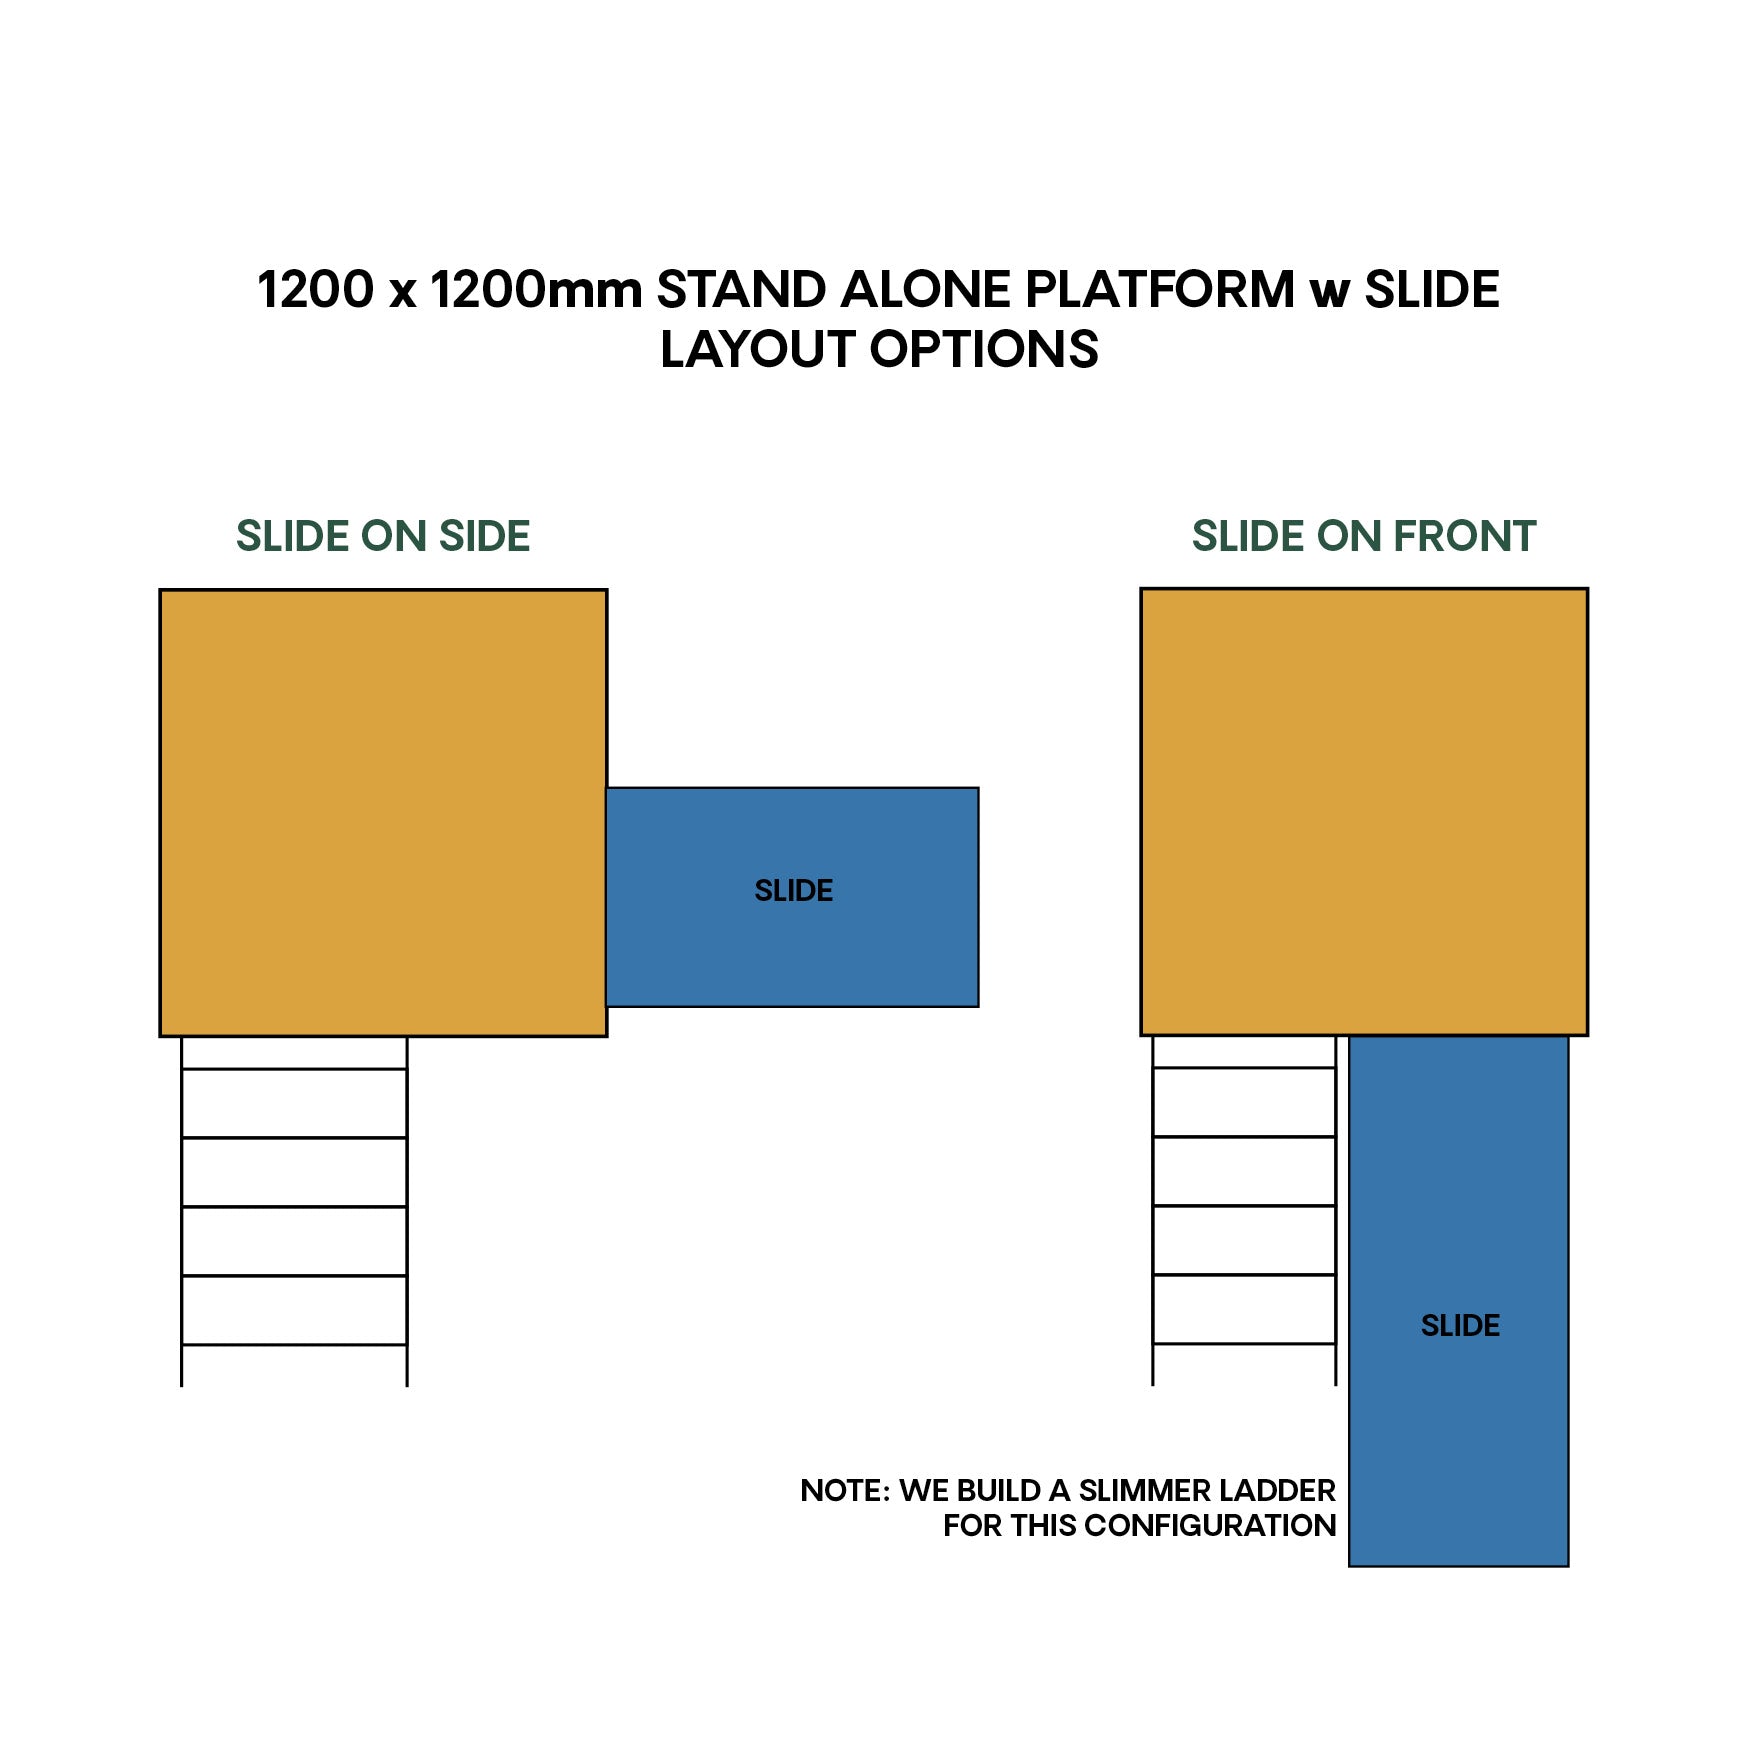 Layout diagram for a standalone 1200x1200mm platform